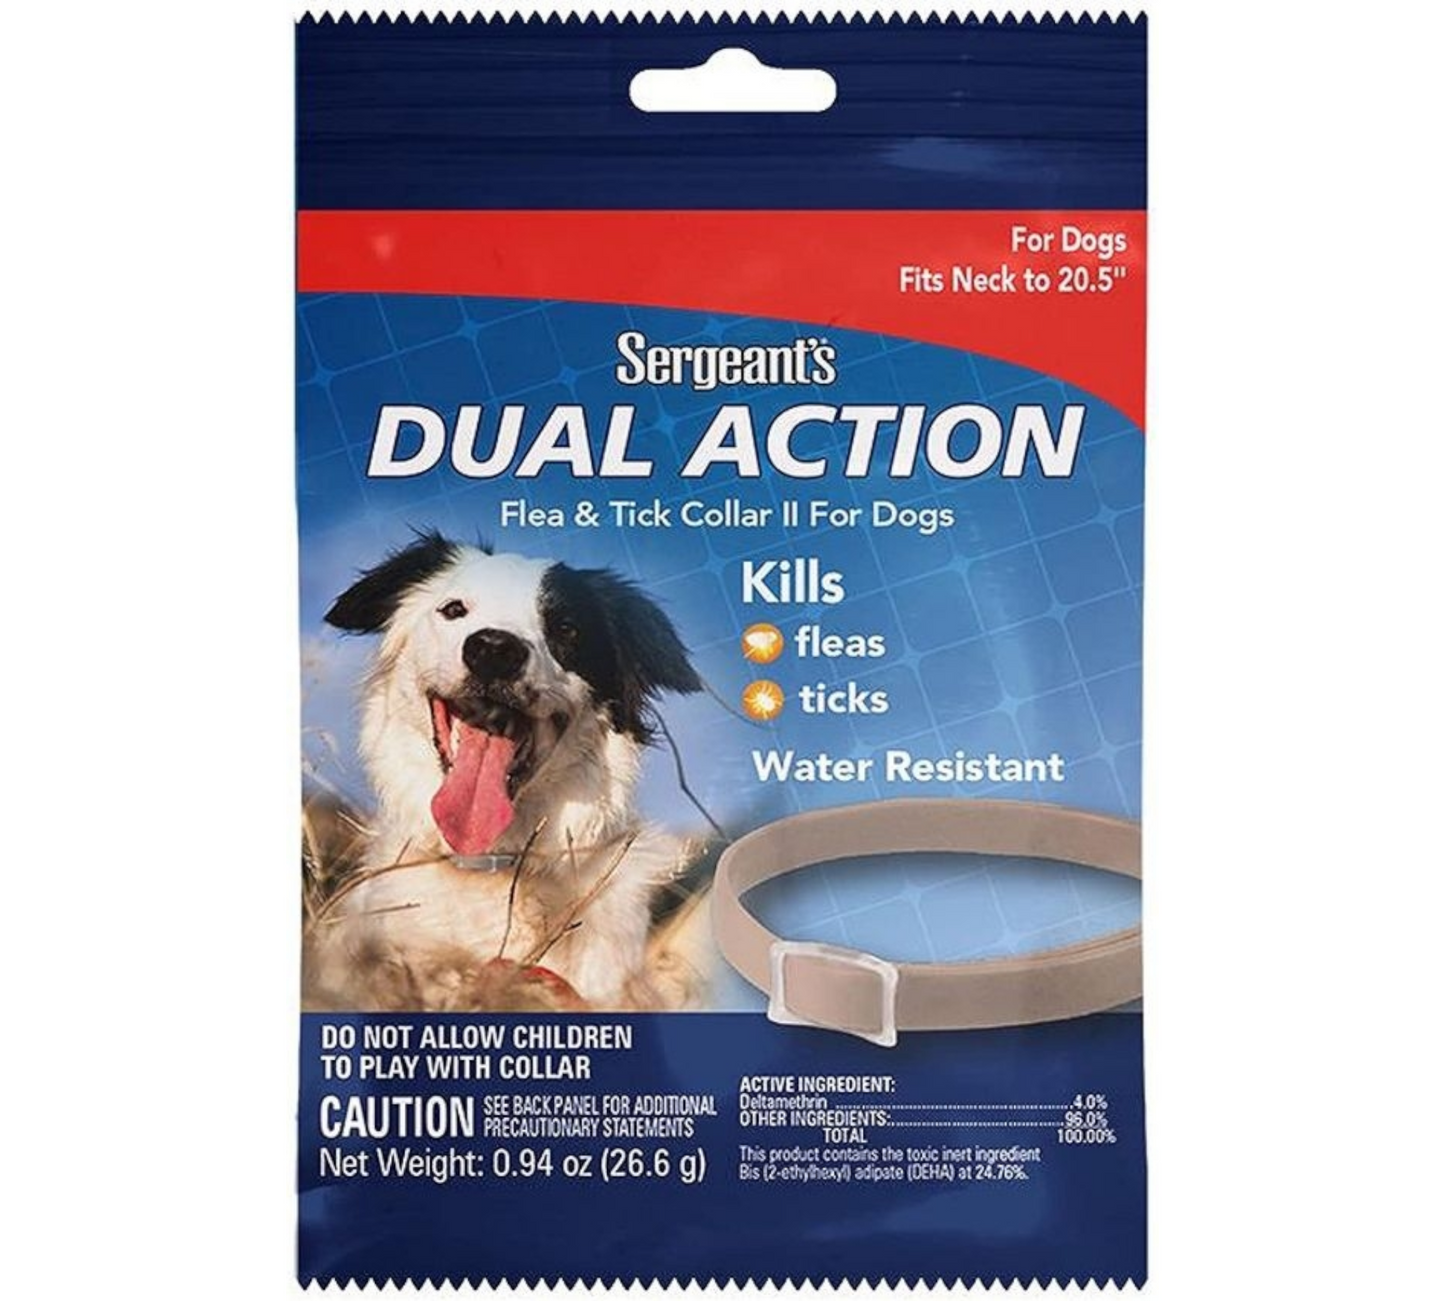 Sergeants Dual Action Flea and Tick Collar II for Dogs